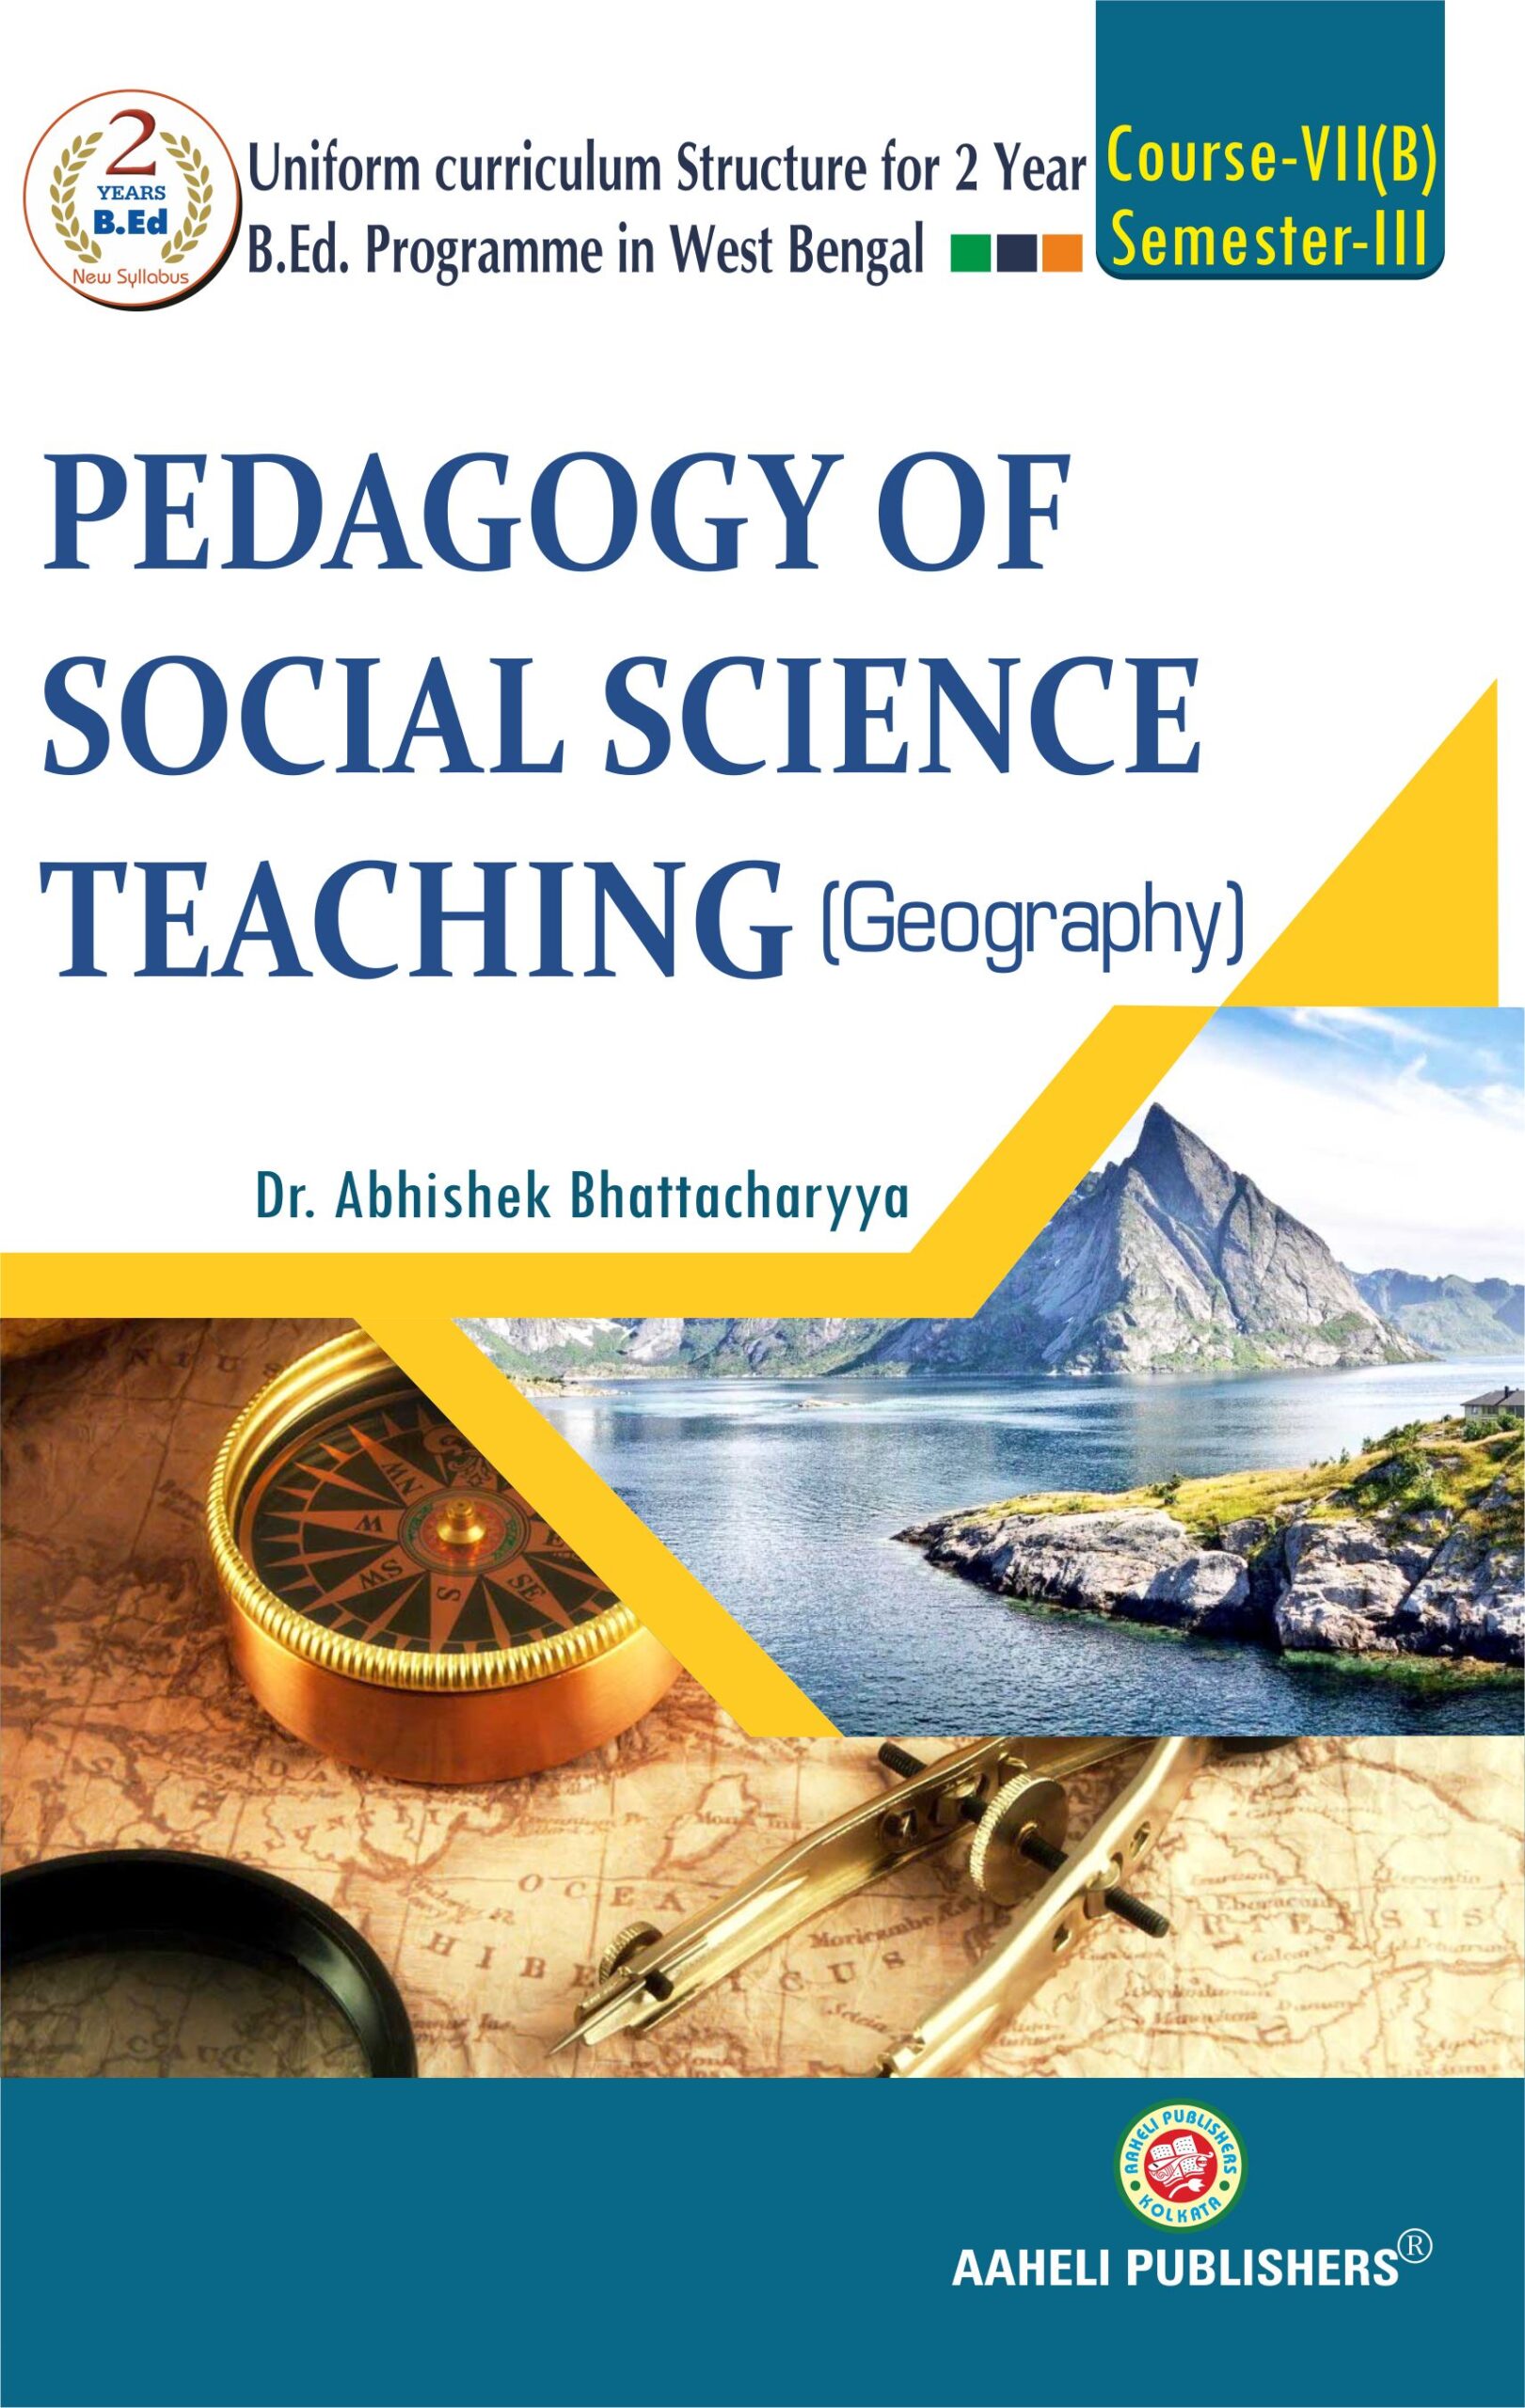 Pedagogy Of Social Science Teaching (Geography) 3rd Sem Aaheli Publishers